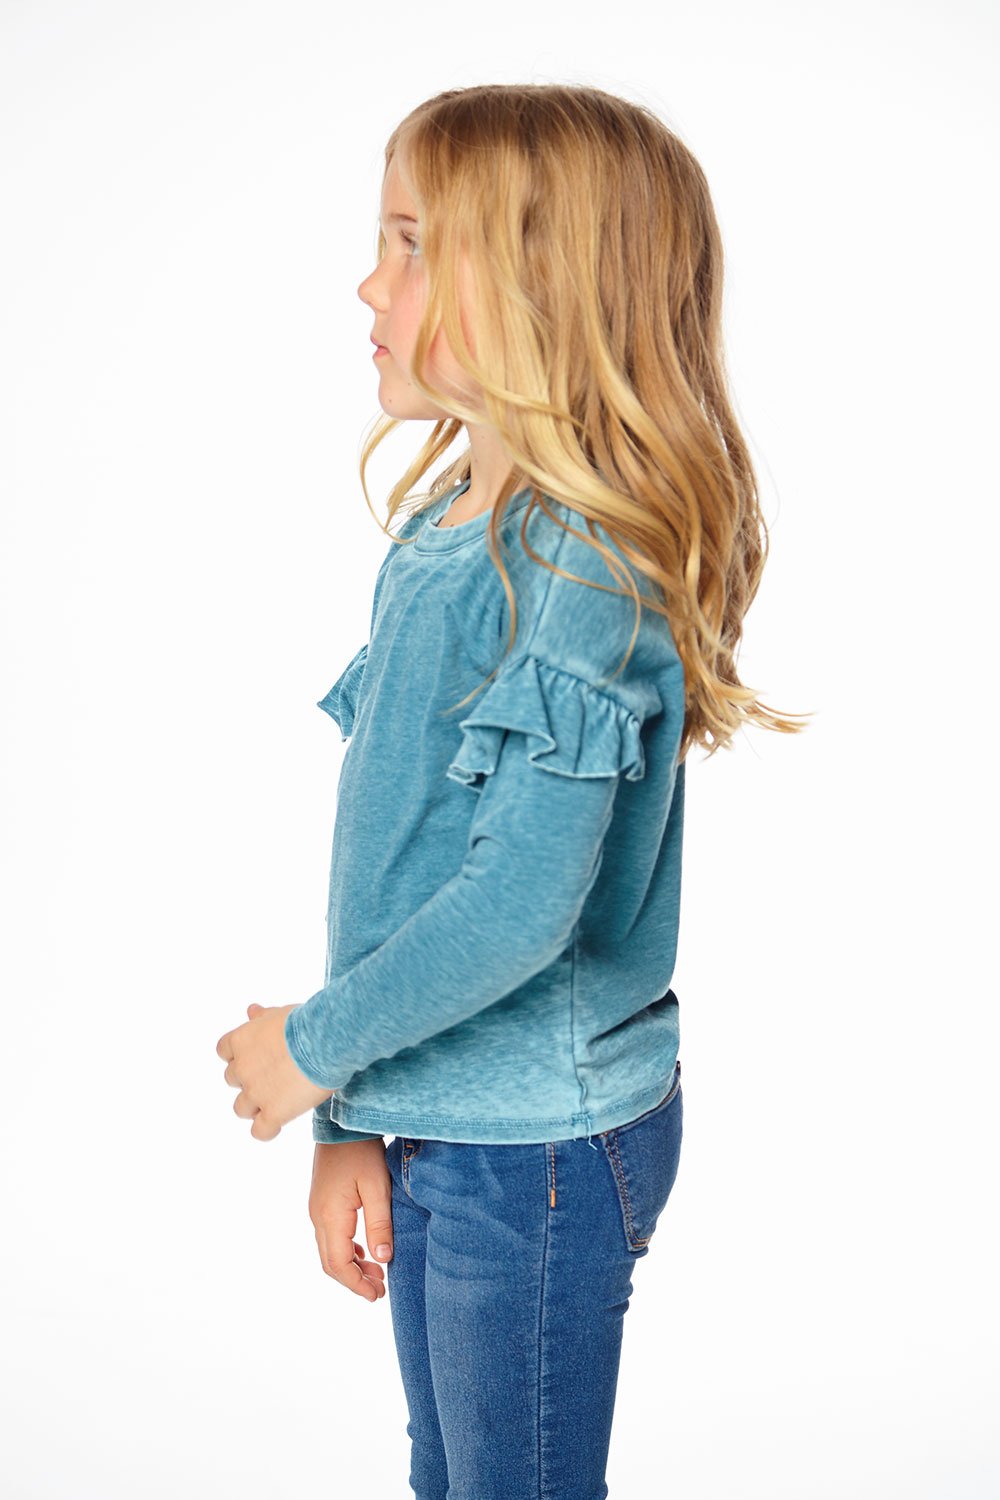 Chaser Girls Vintage Long Sleeve Jersey with Ruffle (Size 2, 3,12)